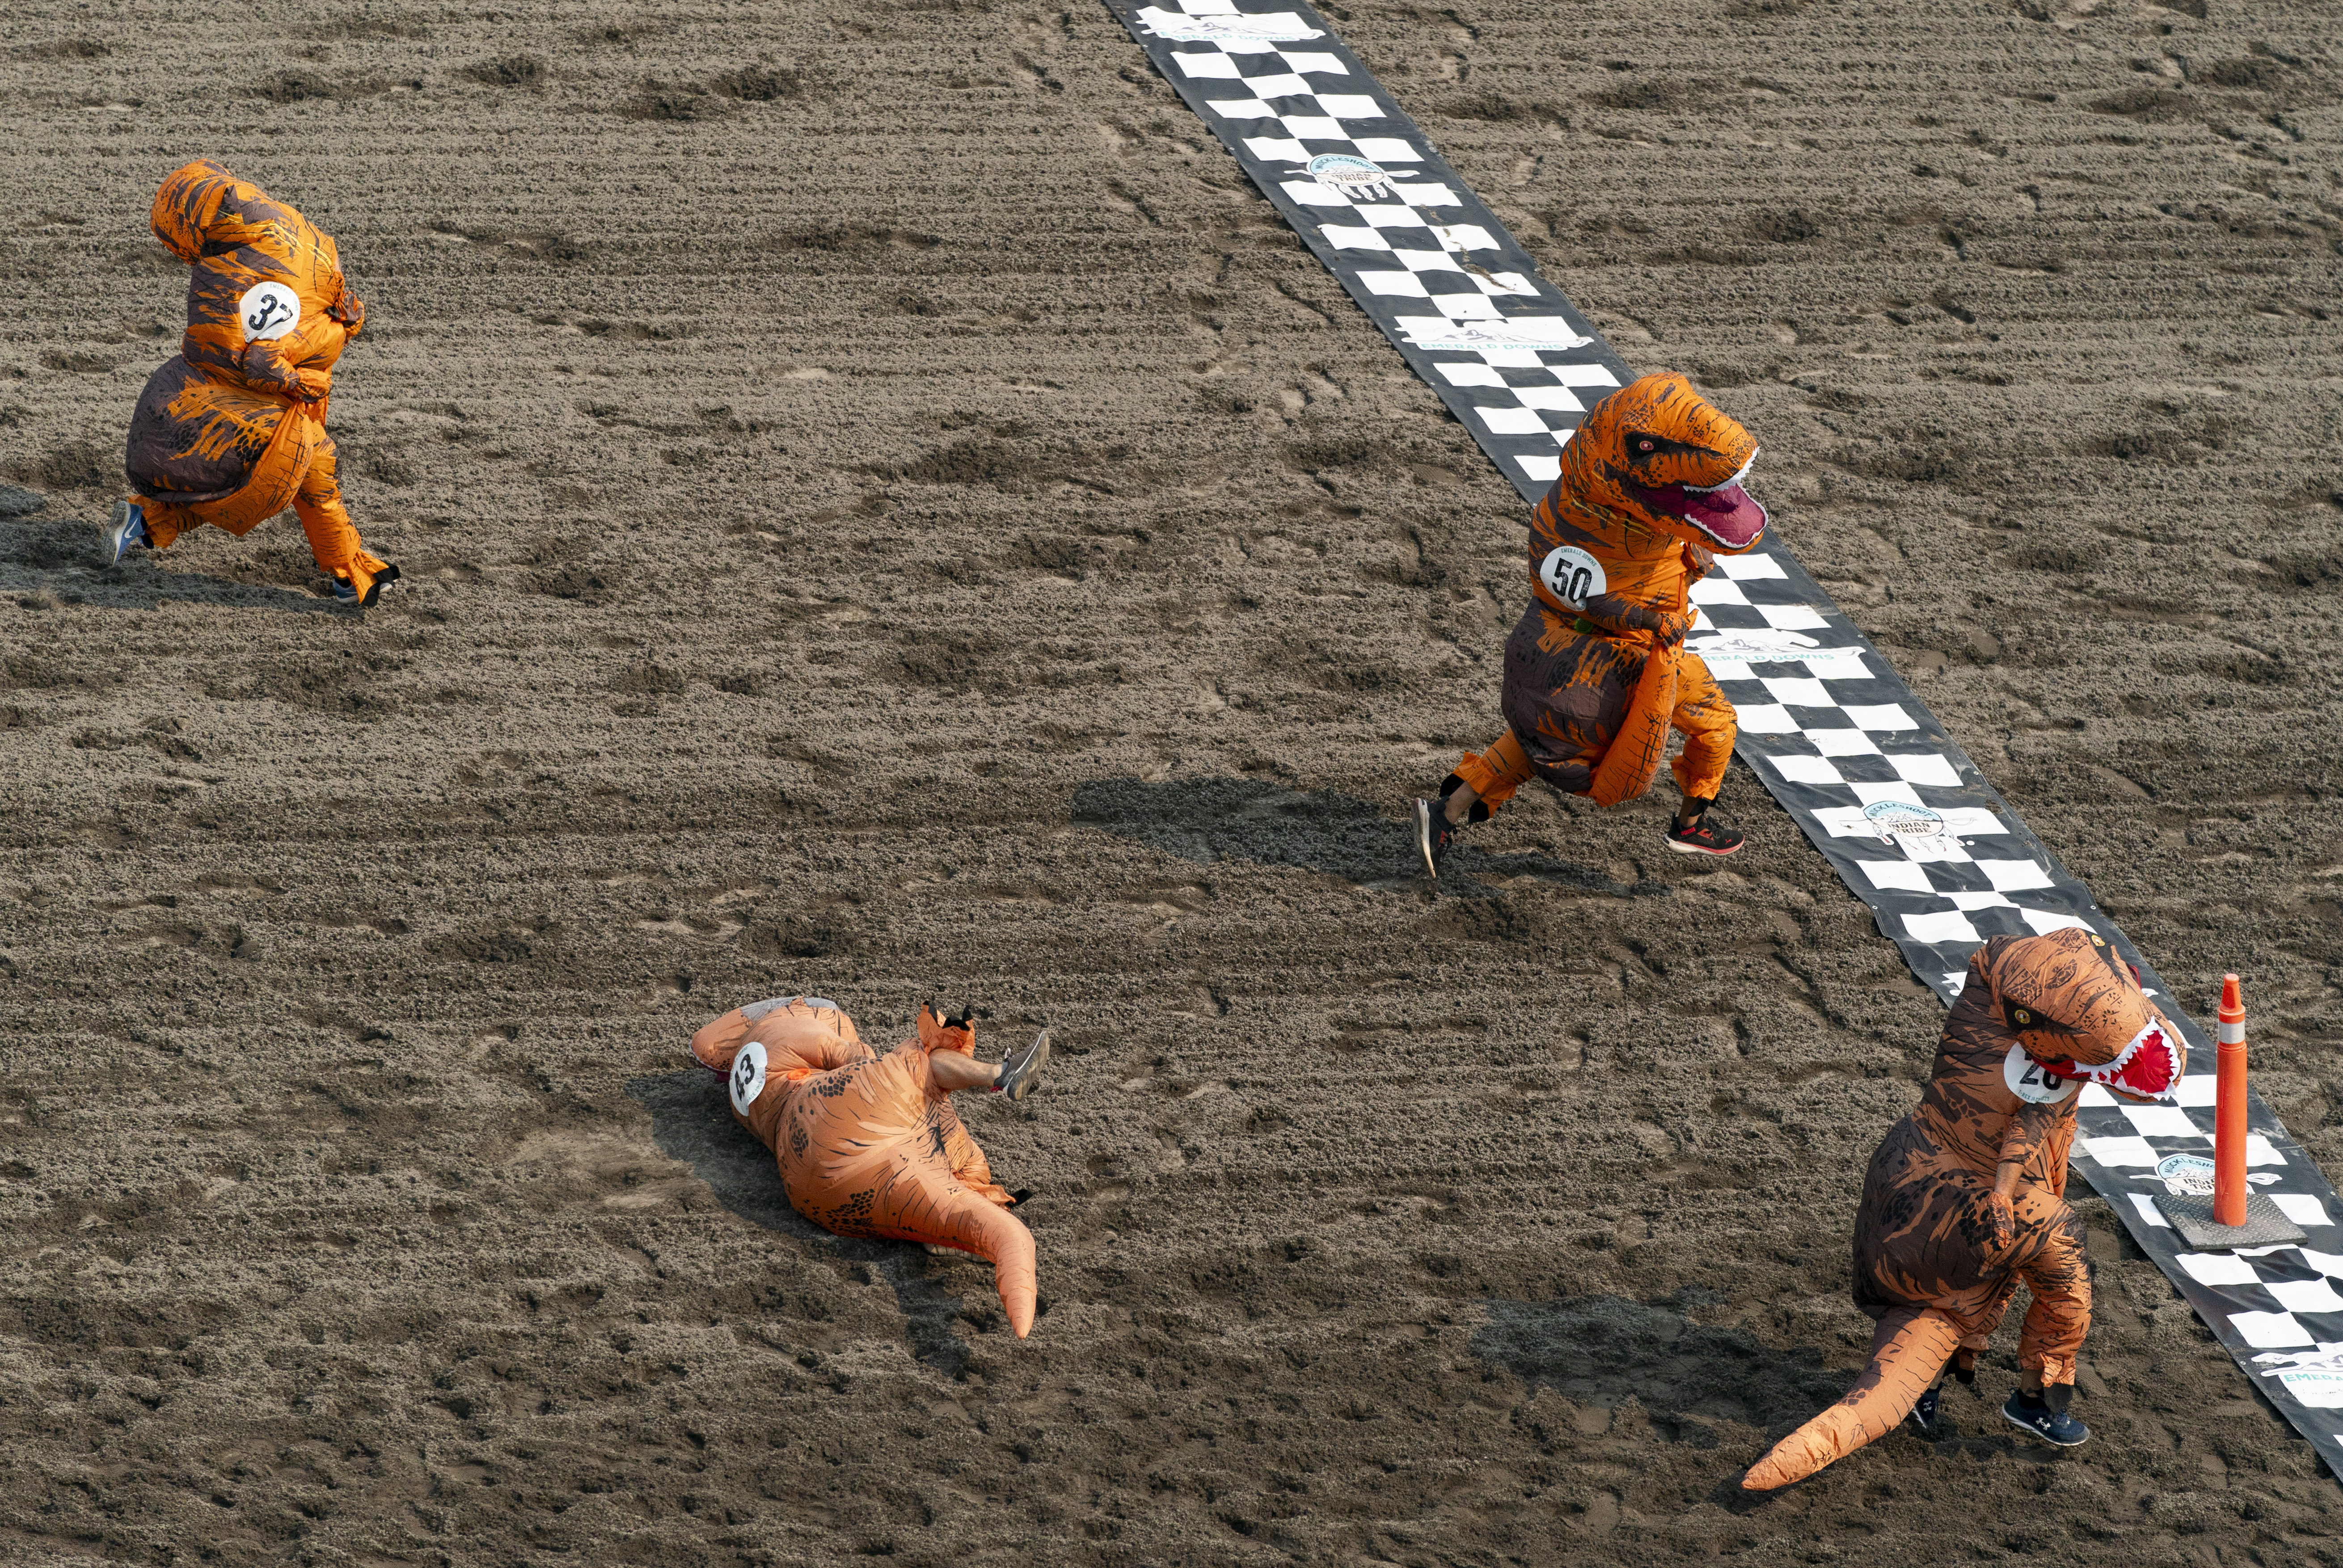 Washington runners take to the race track for a hilarious dinosaur race